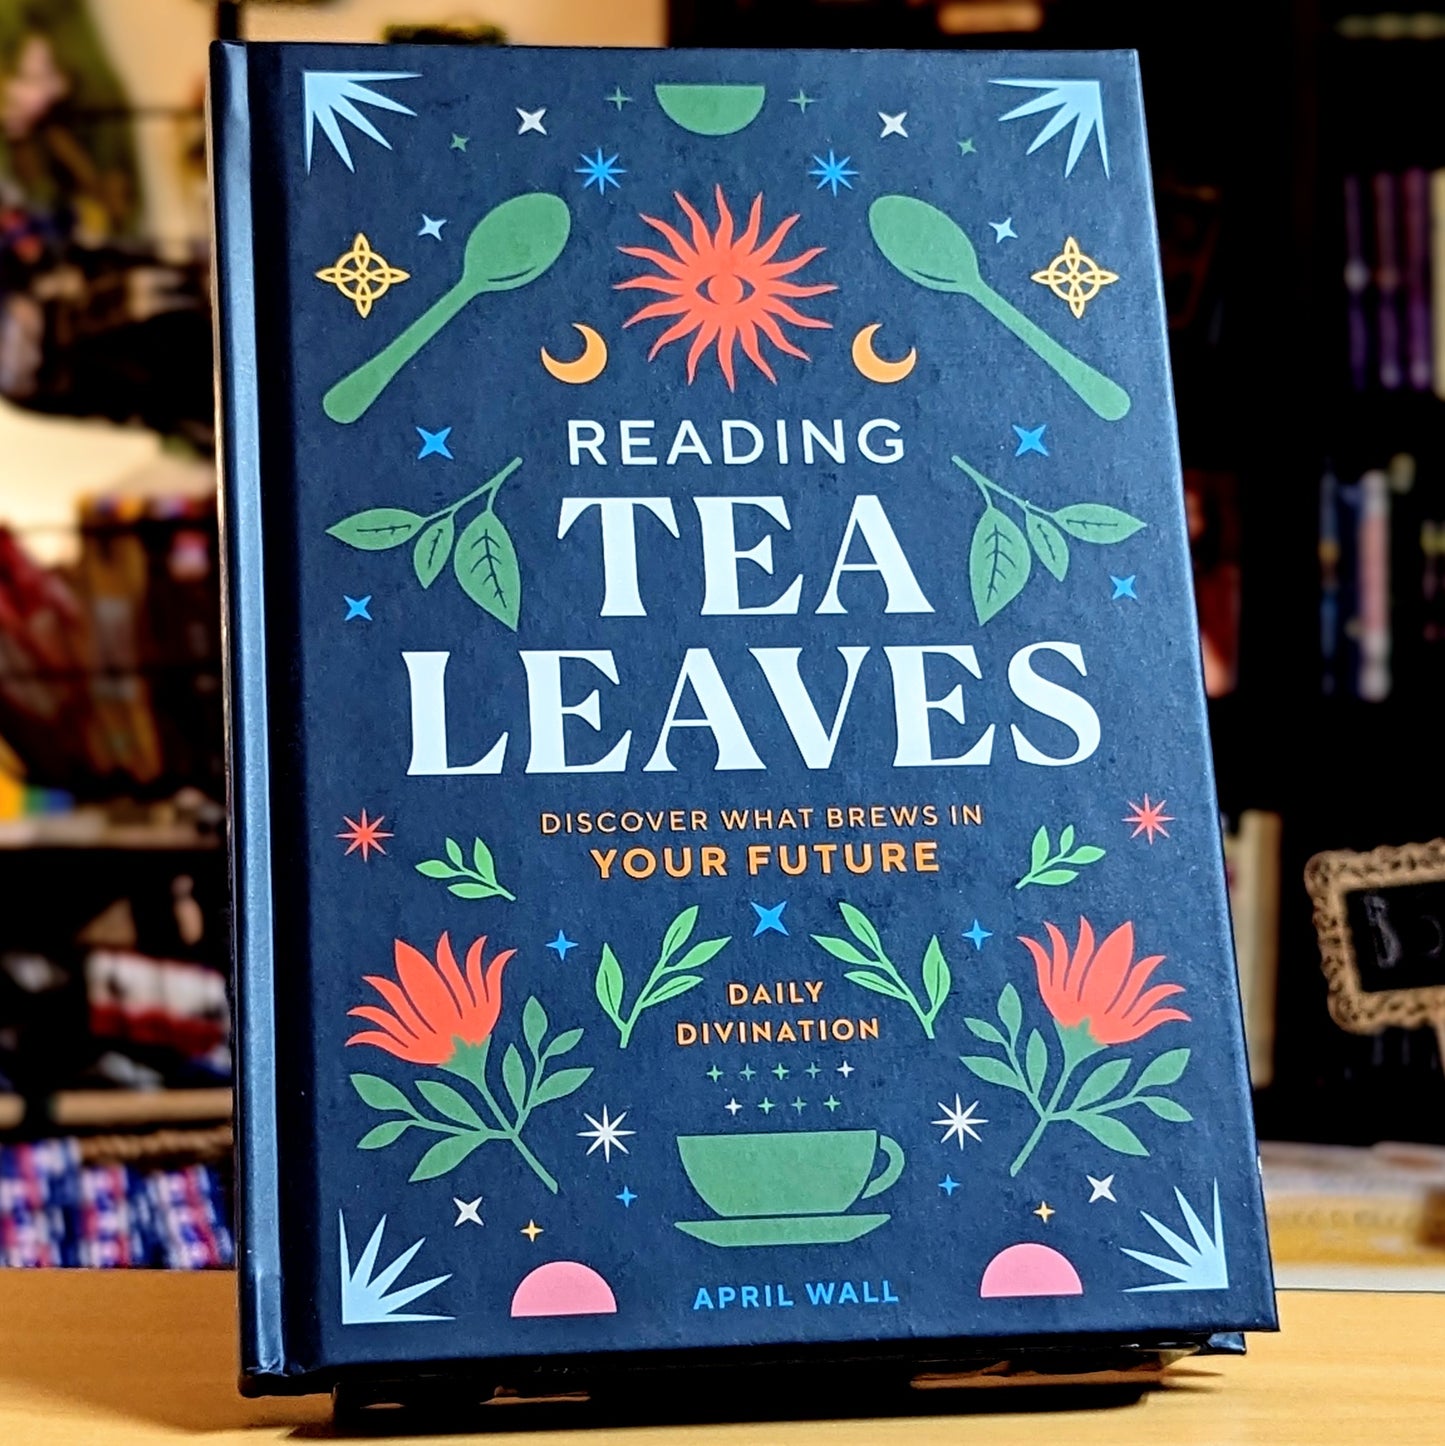 Reading Tea Leaves: Discover What Brews in Your Future (Daily Divination)